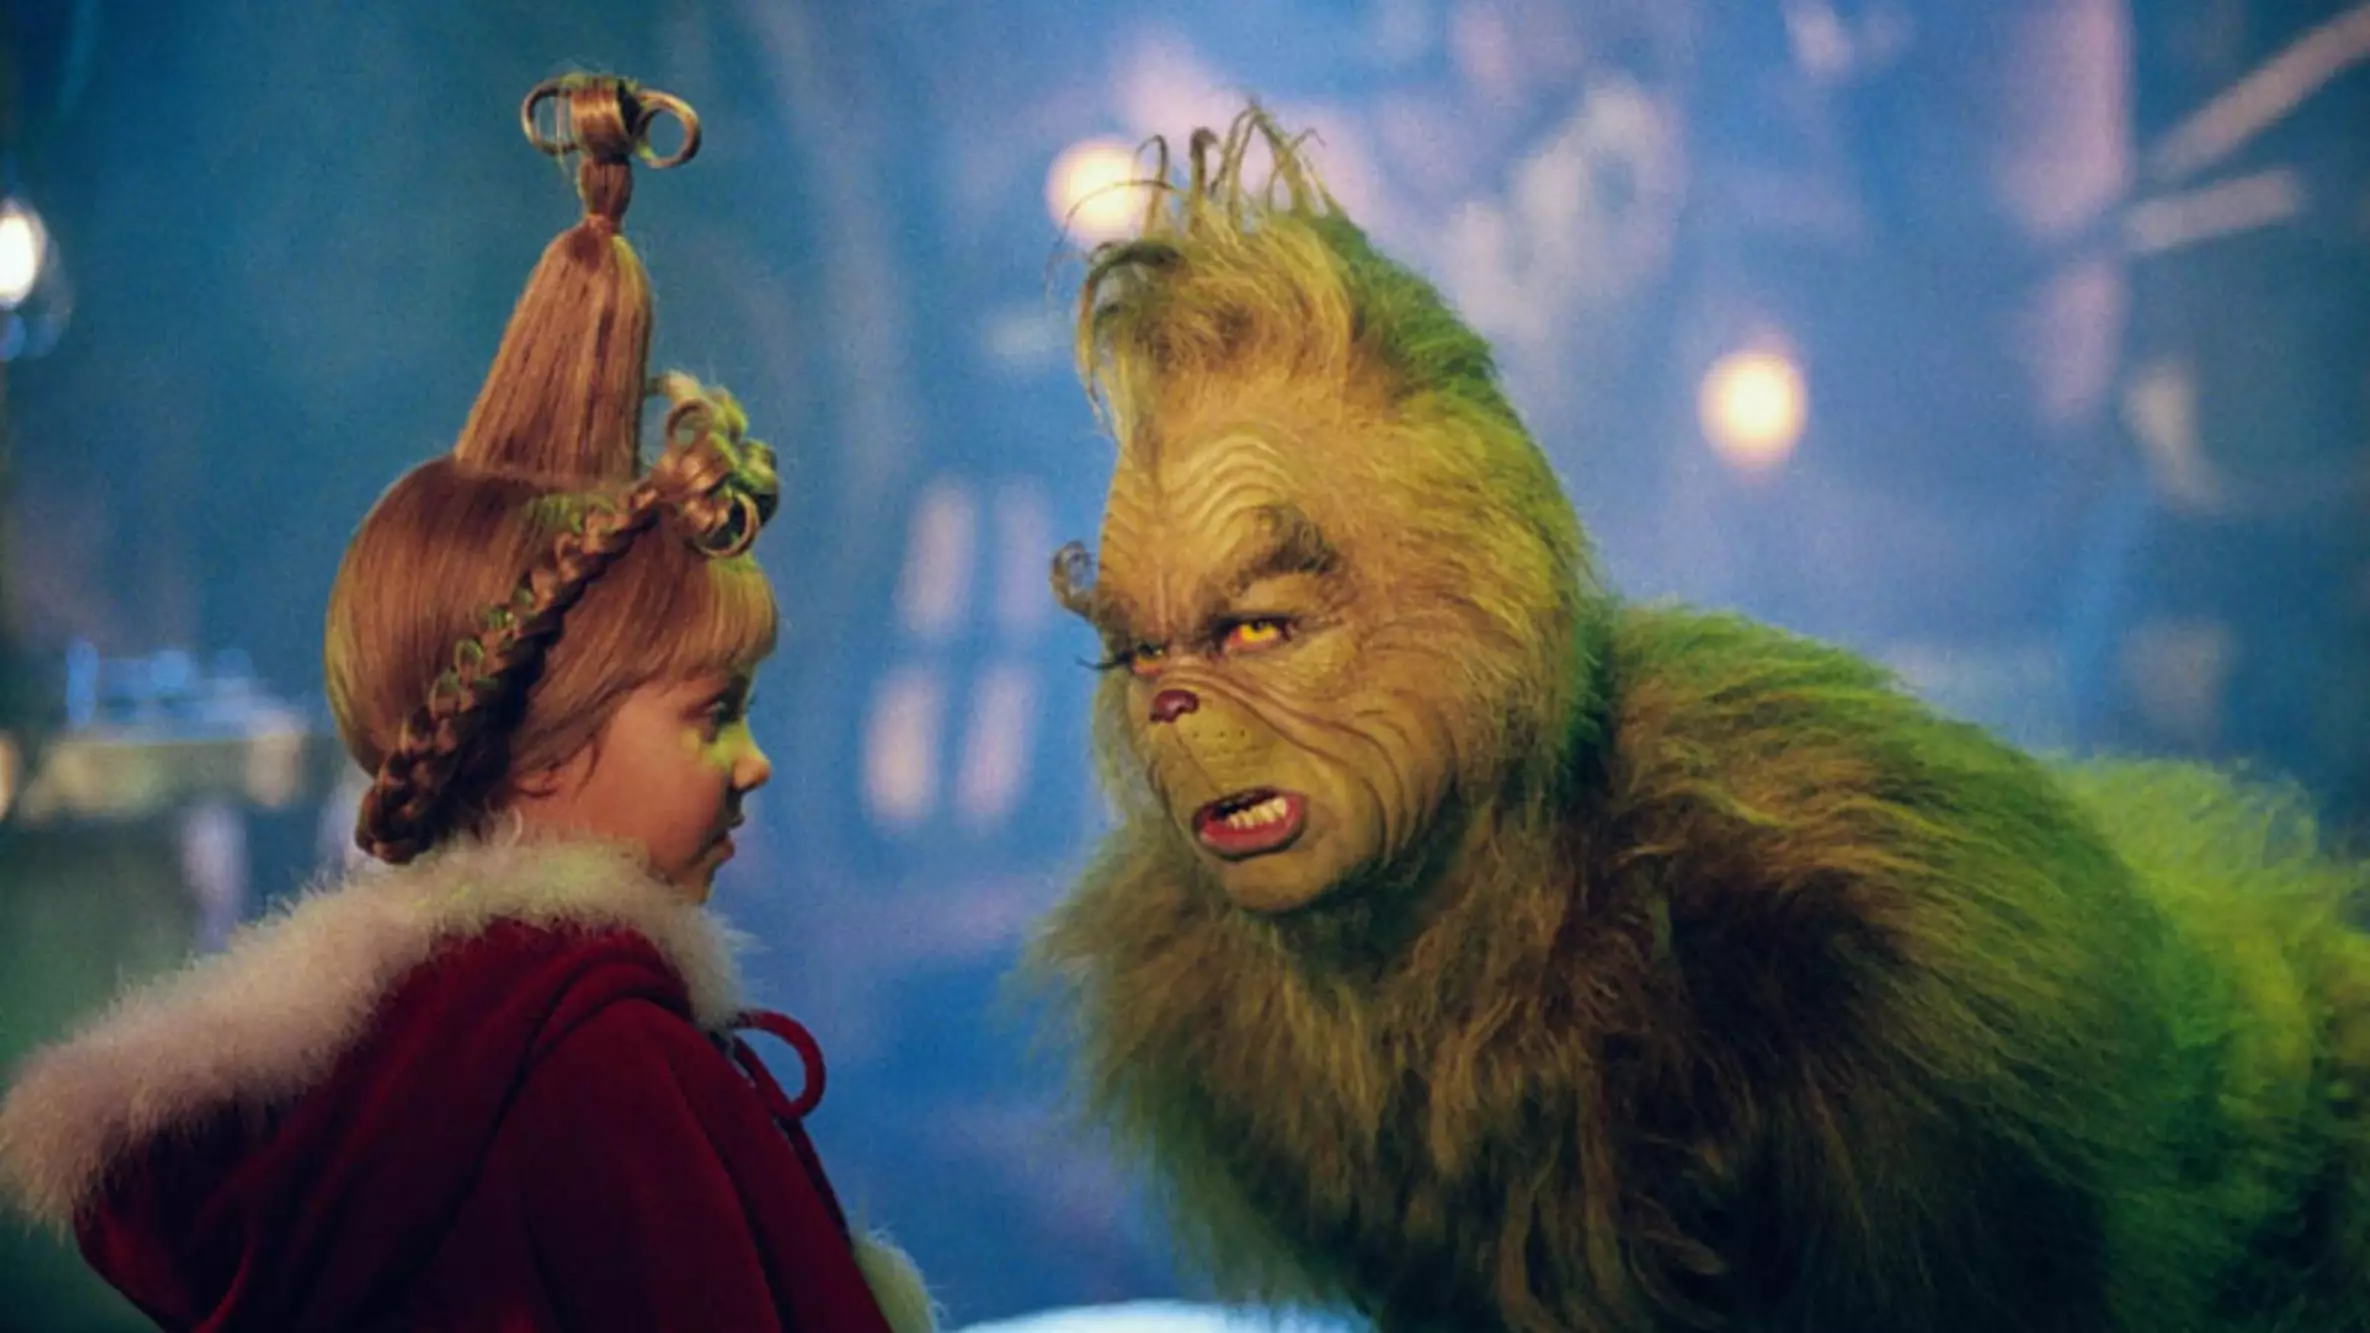 ​Taylor Momsen Says Filming The Grinch Influenced Her New Career